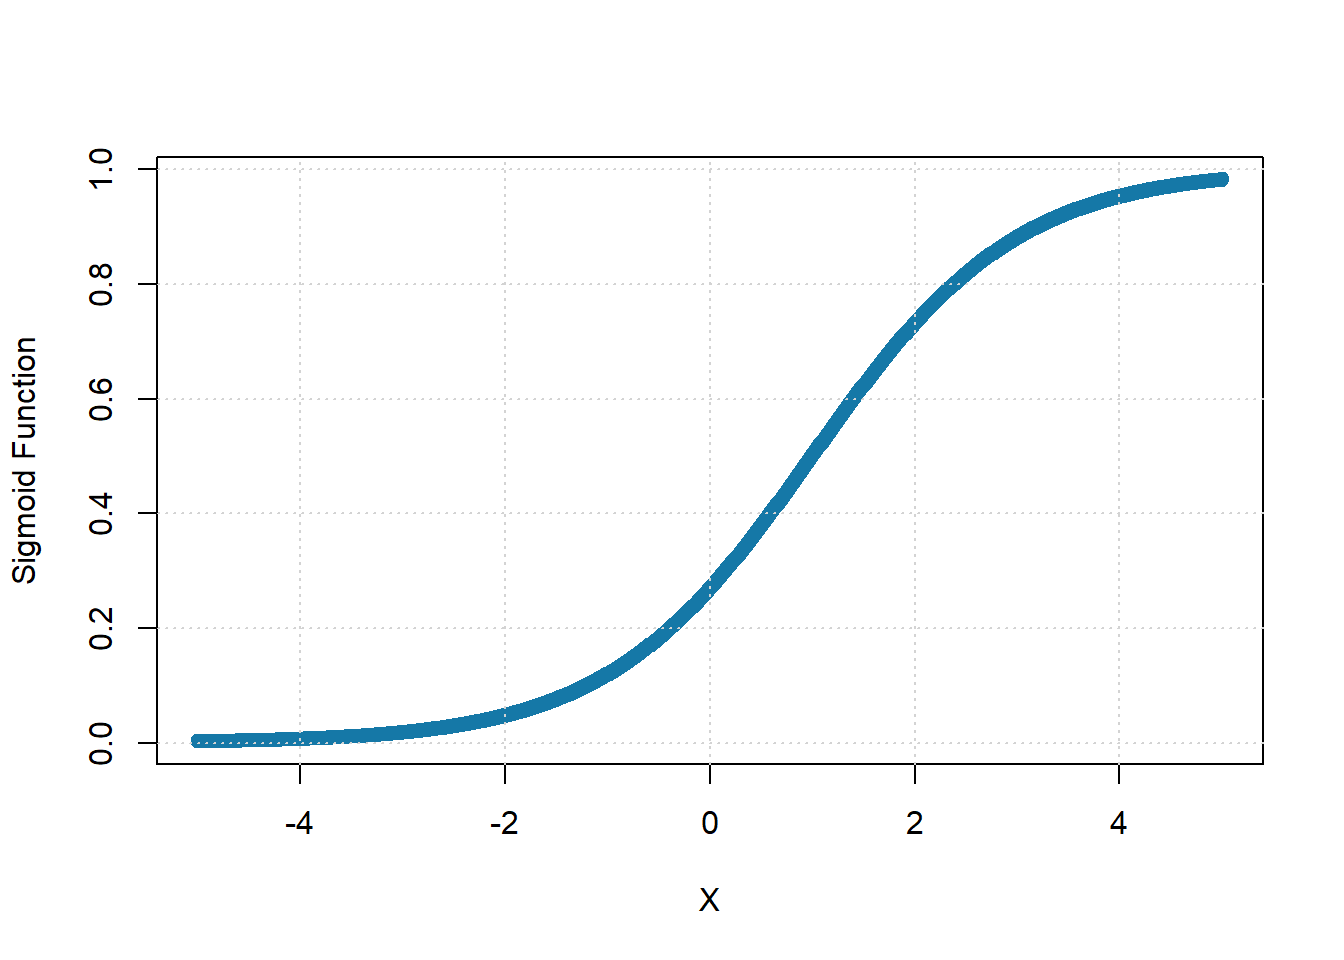 Figure  5: Sigmoid Subpopulation Response Function, with $\theta=5$ and $a=1$.